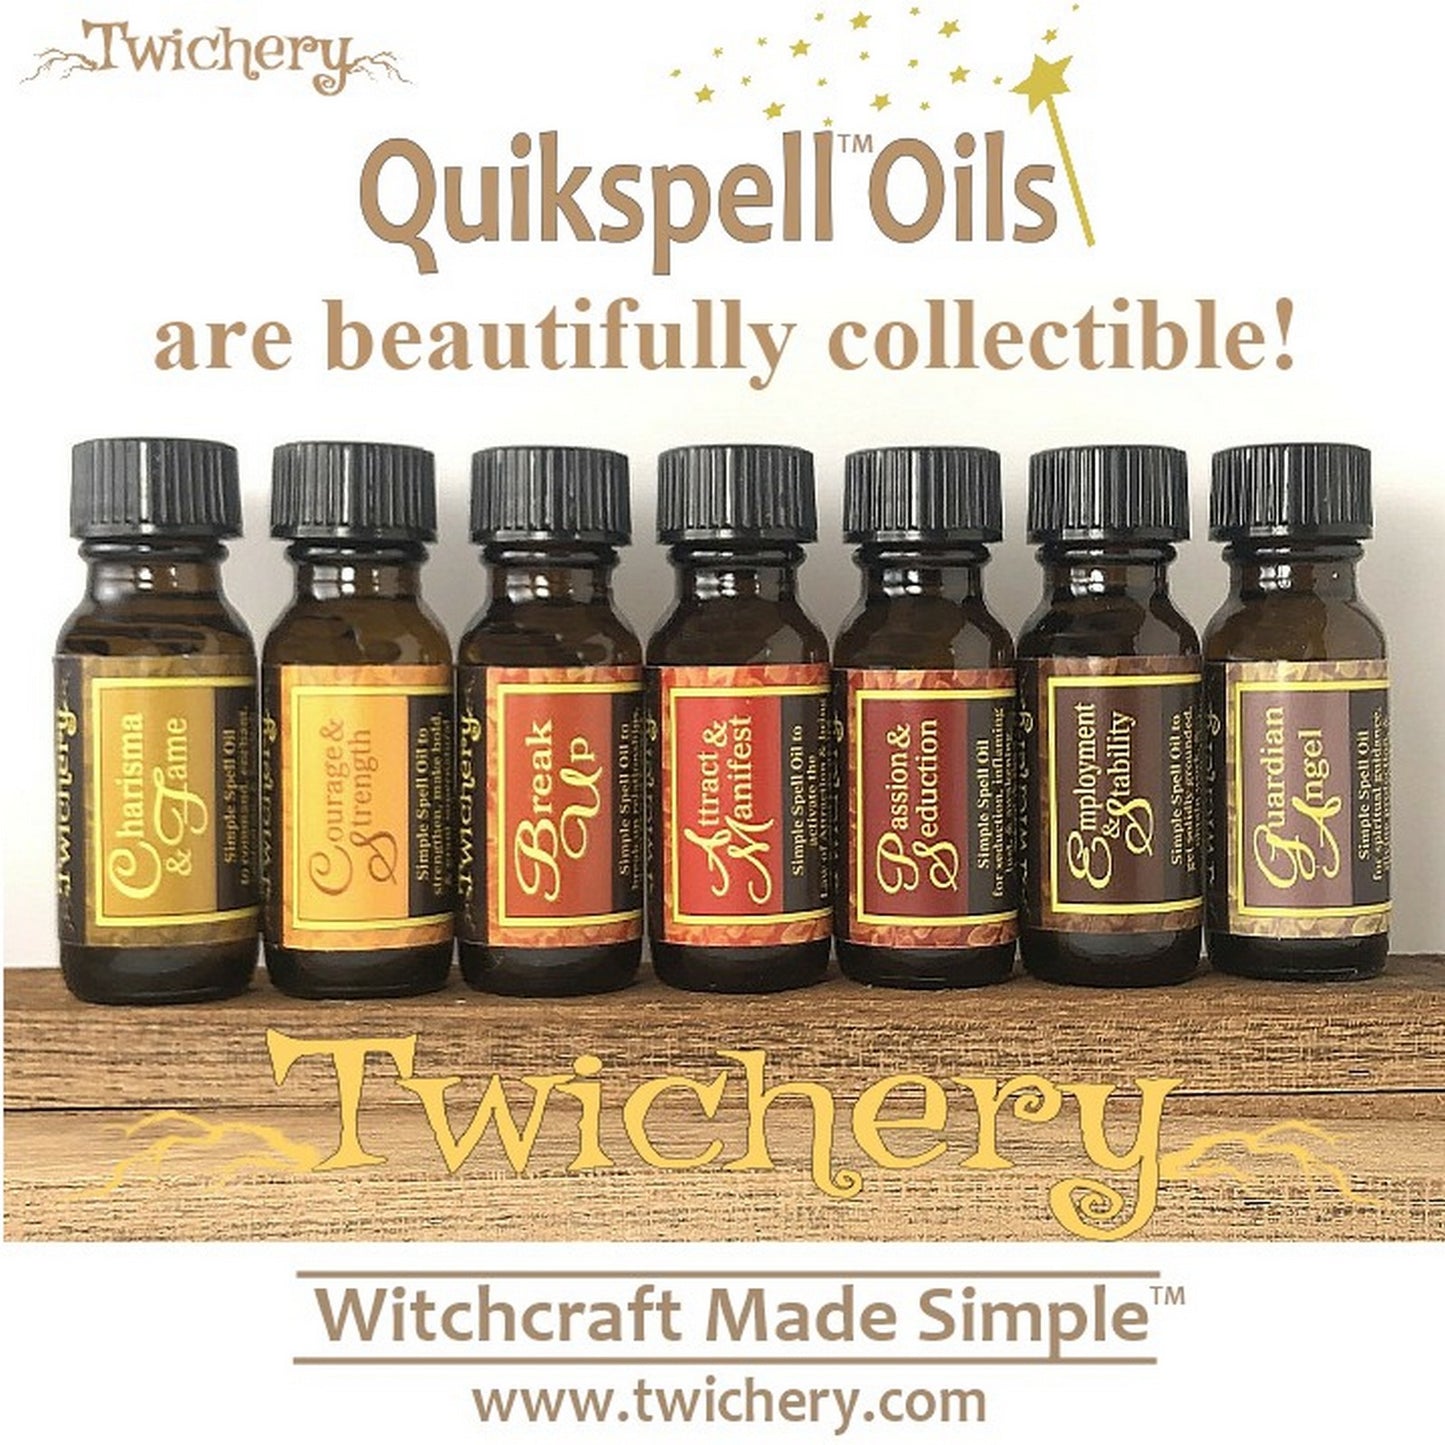 Twichery is Witchcraft Made Simple and Quick! Our Come to Me Quikspell Oil is for tender love and romance. Terrific for matchmaking! Hoodoo, Voodoo, Wicca, Pagan, Witchcraft Made Simple!